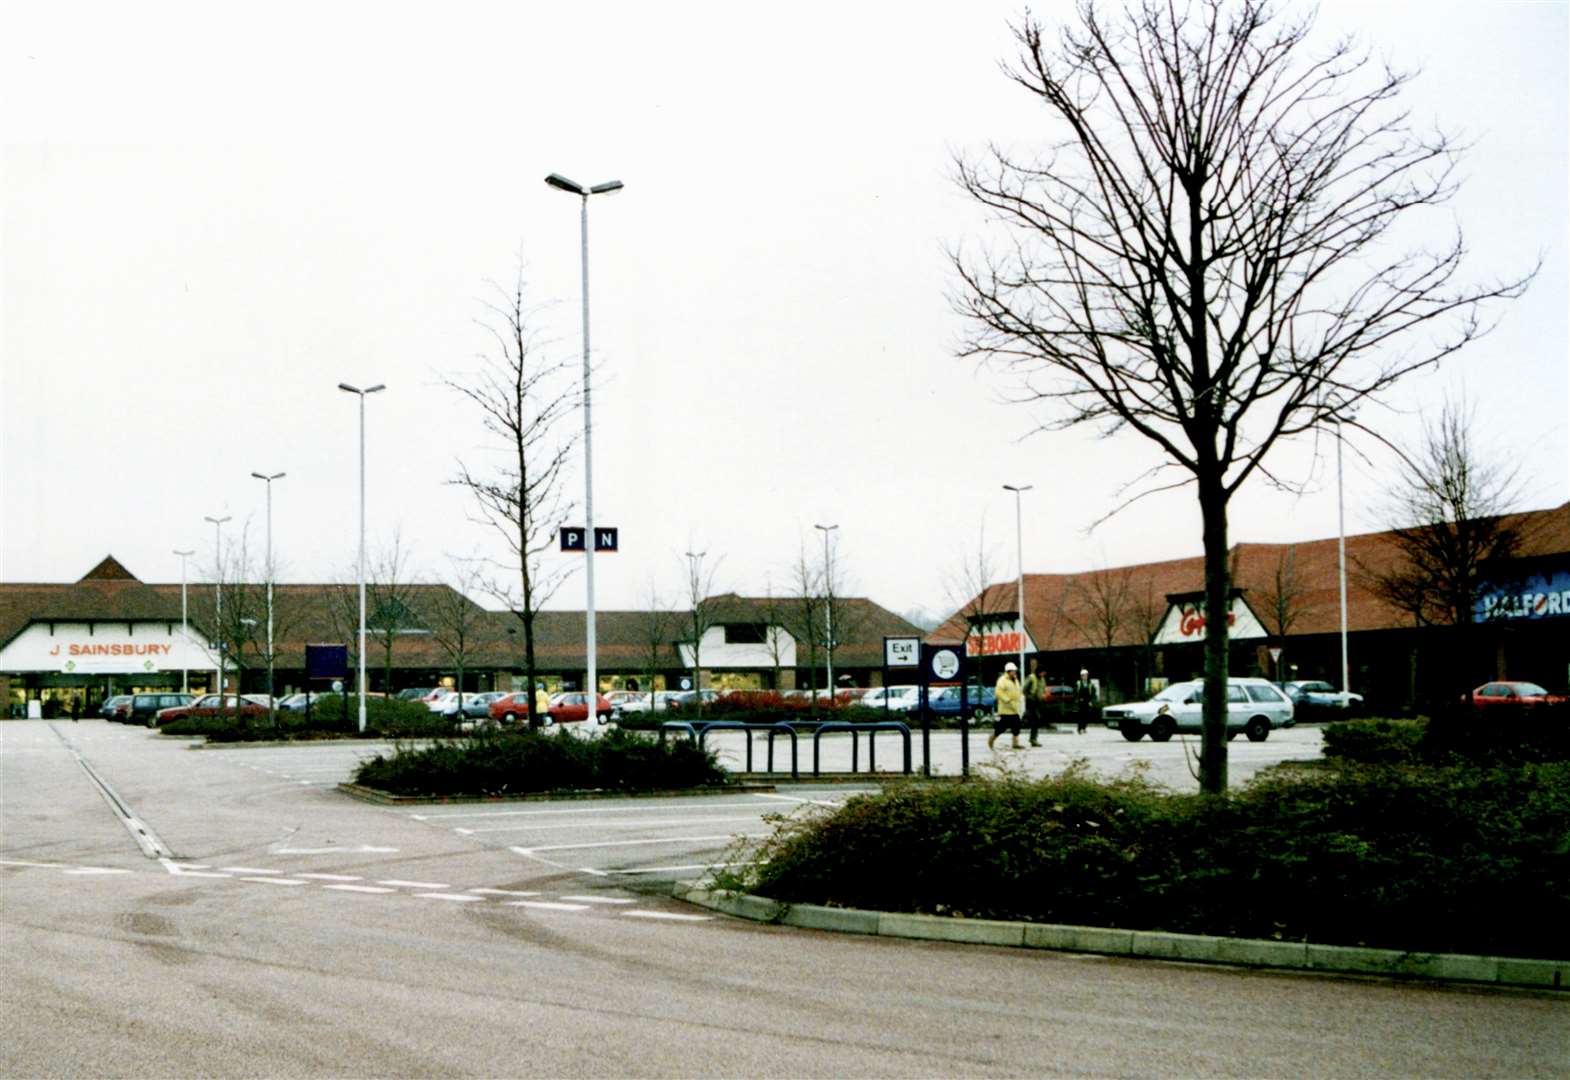 The Warren Retail Park, pictured in 2007. The shooting happened just to the right of Halfords, which has since been demolished when Sainsbury’s was extended